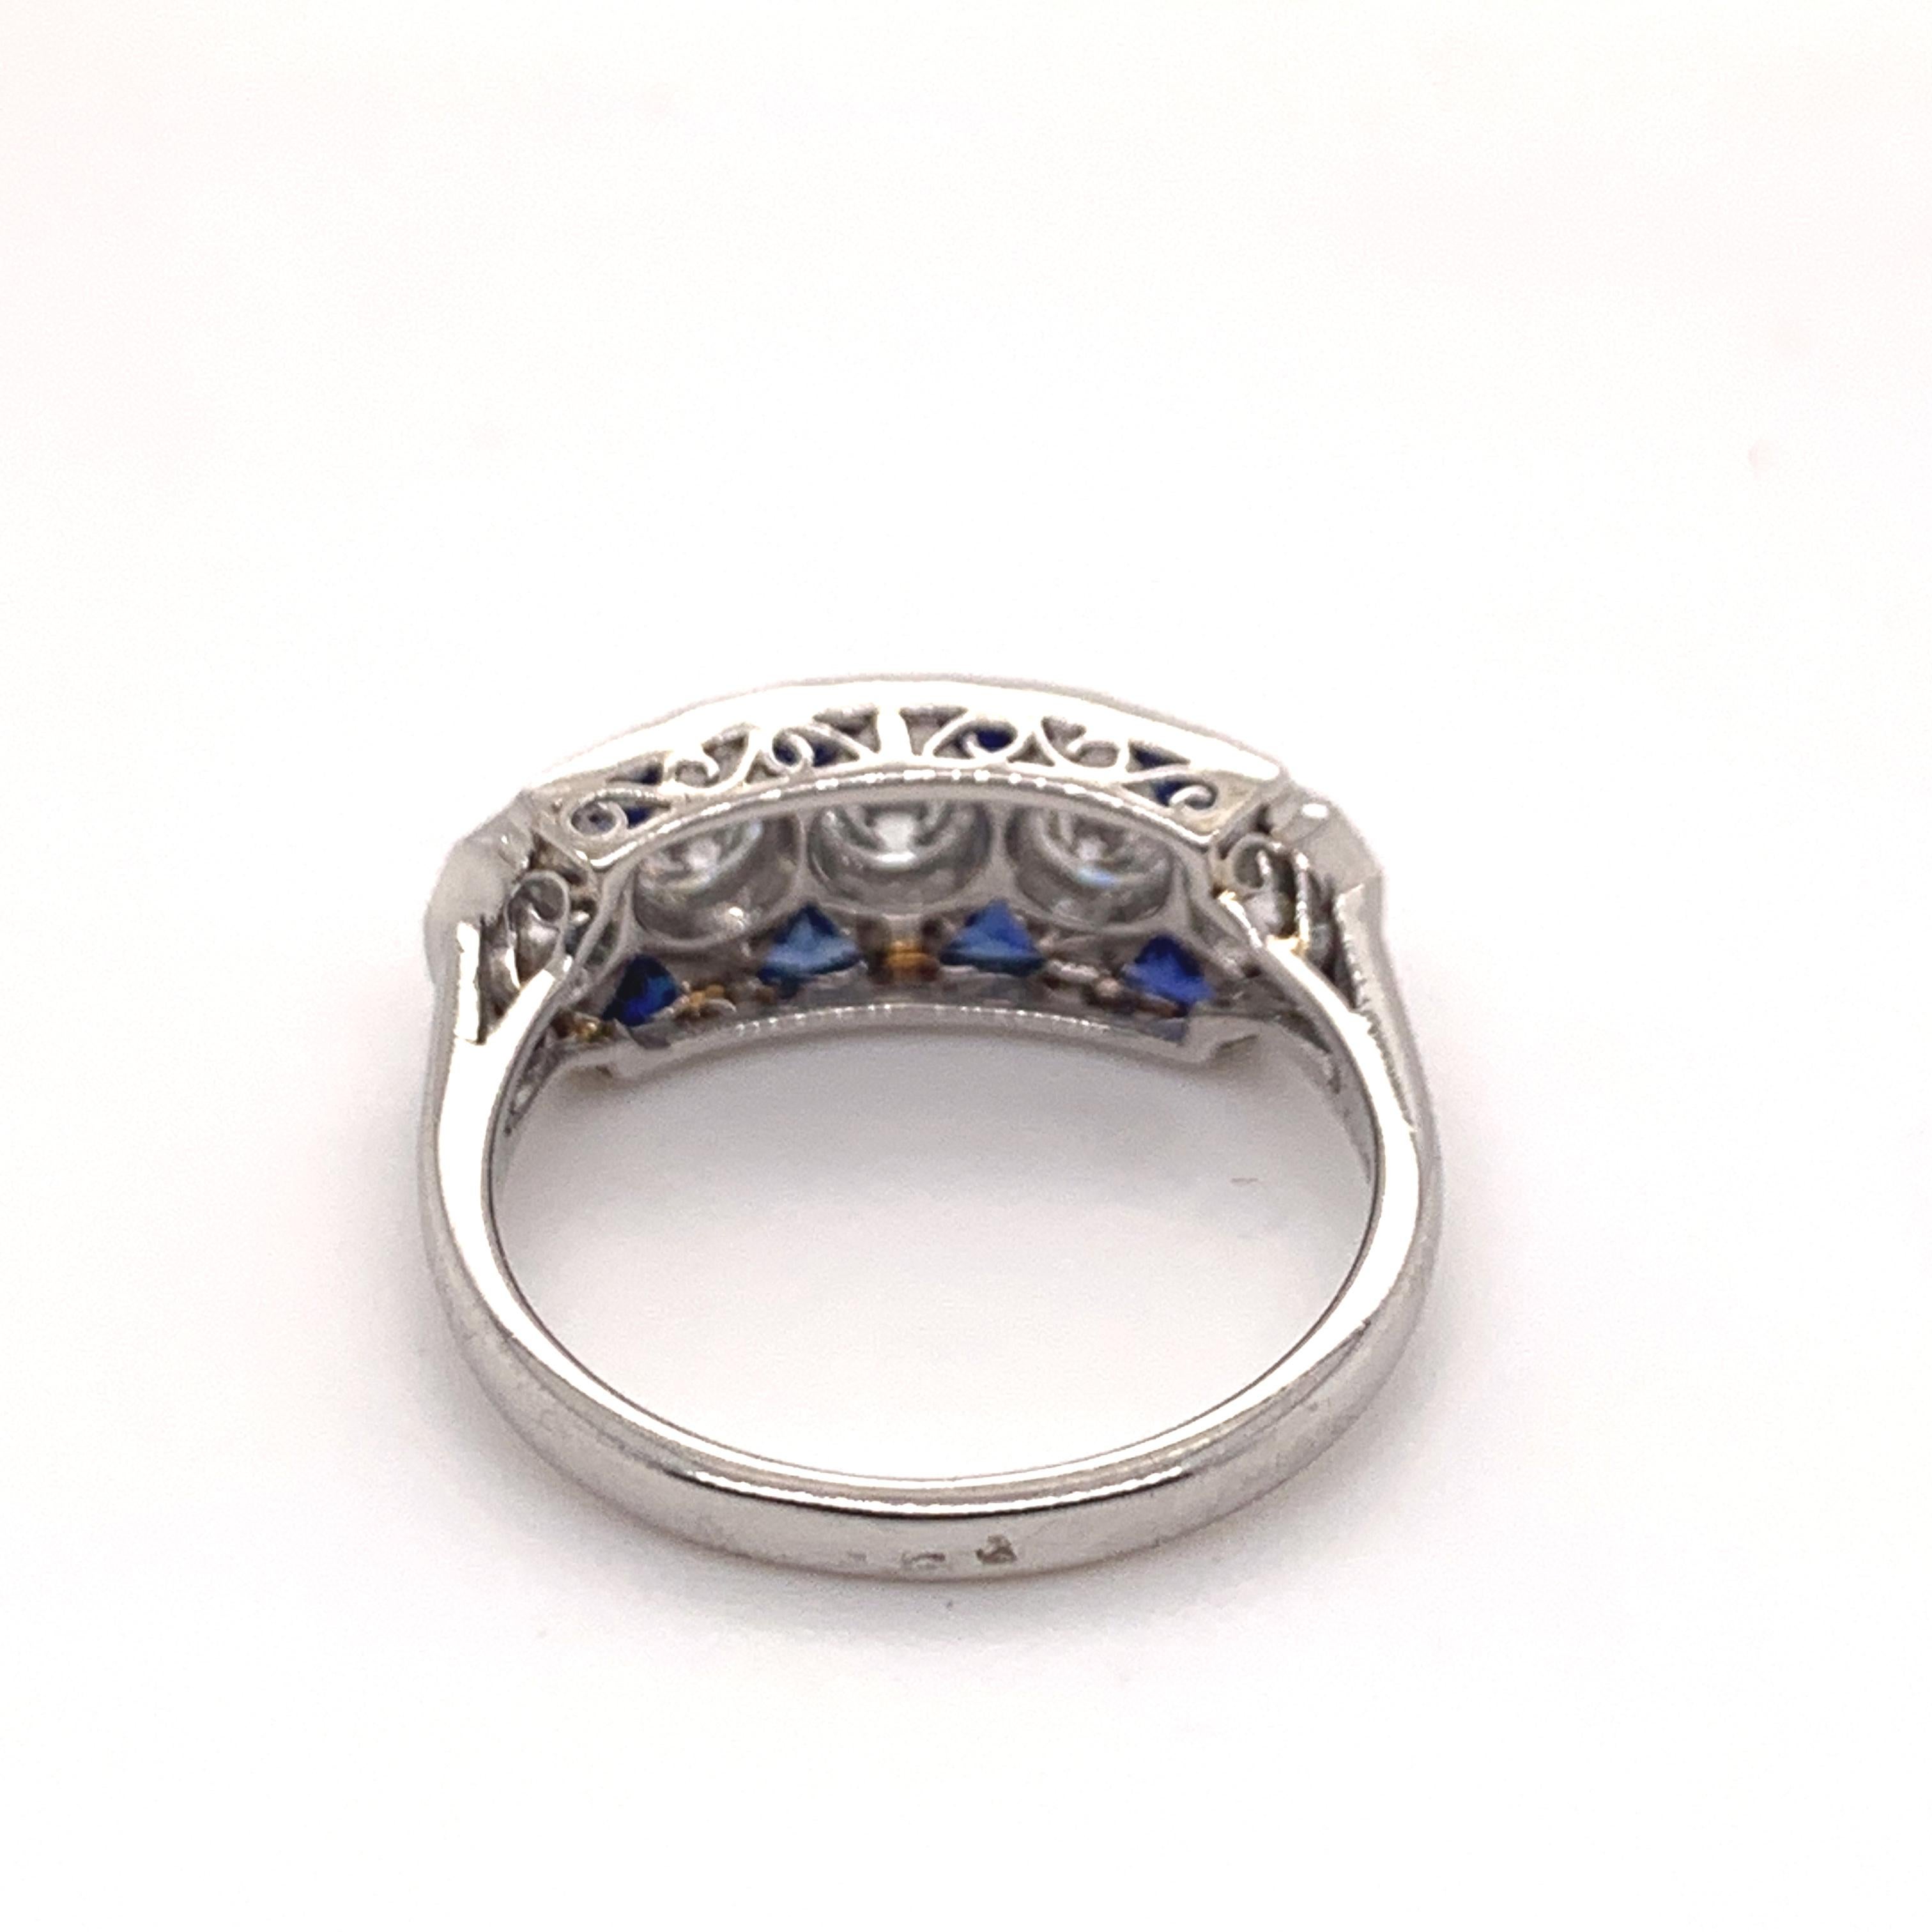 Sophia D. 2.06 Carat Diamond and Blue Sapphire Art Deco Platinum Ring In New Condition For Sale In New York, NY